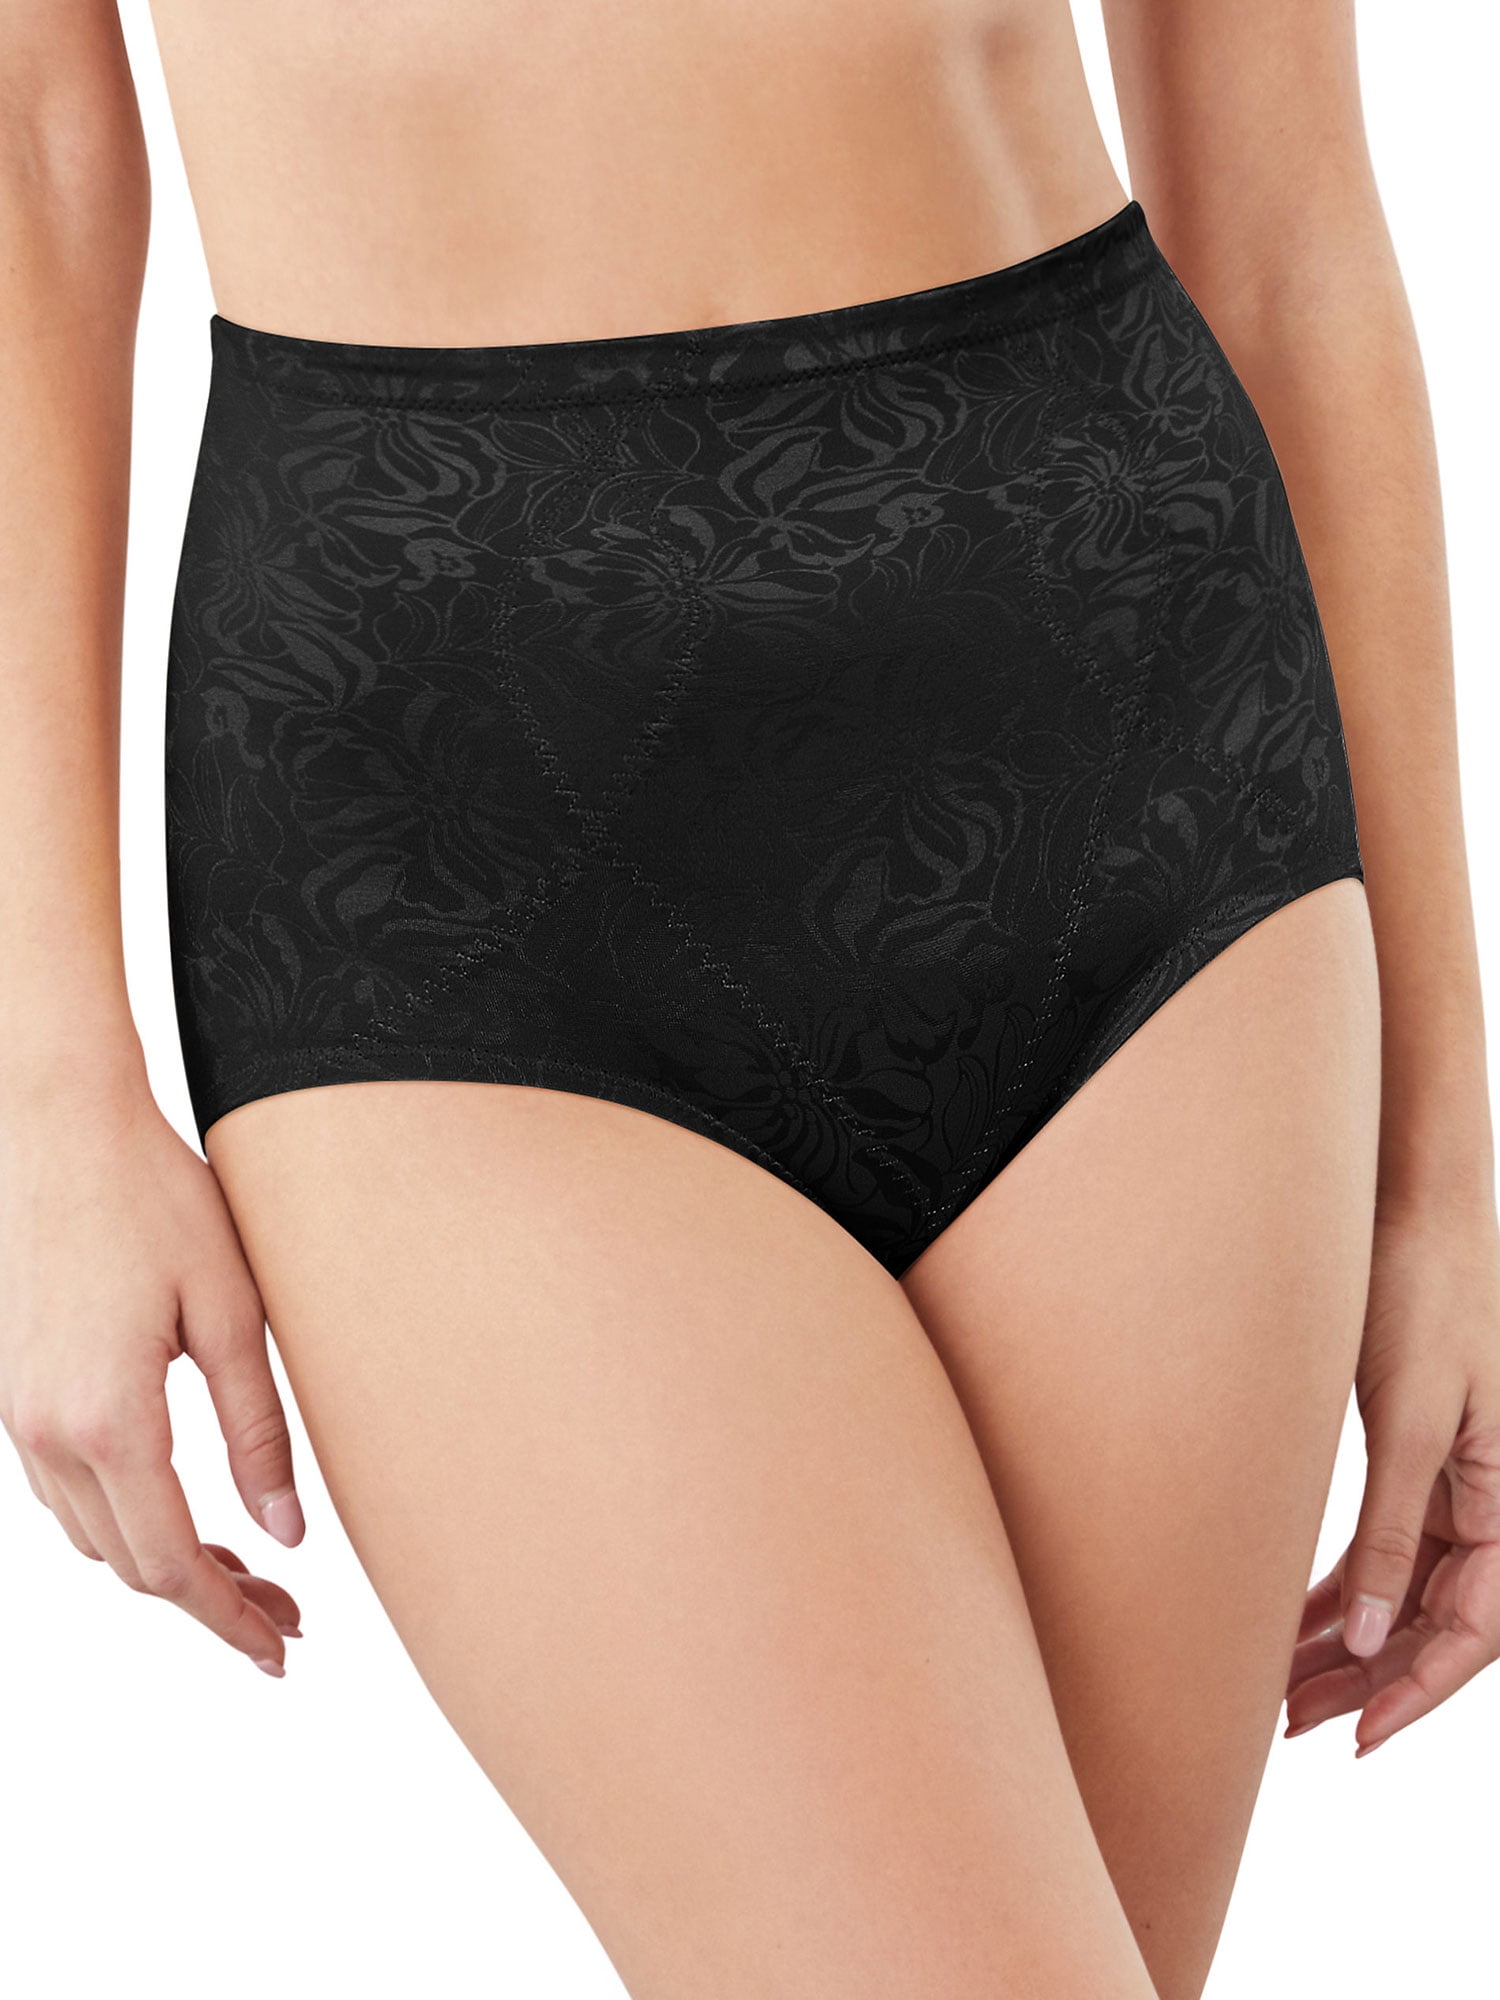 Flexees by Maidenform Firm Control Seamless Packaged Thighslimmer 83046  (2X-Large, Black)